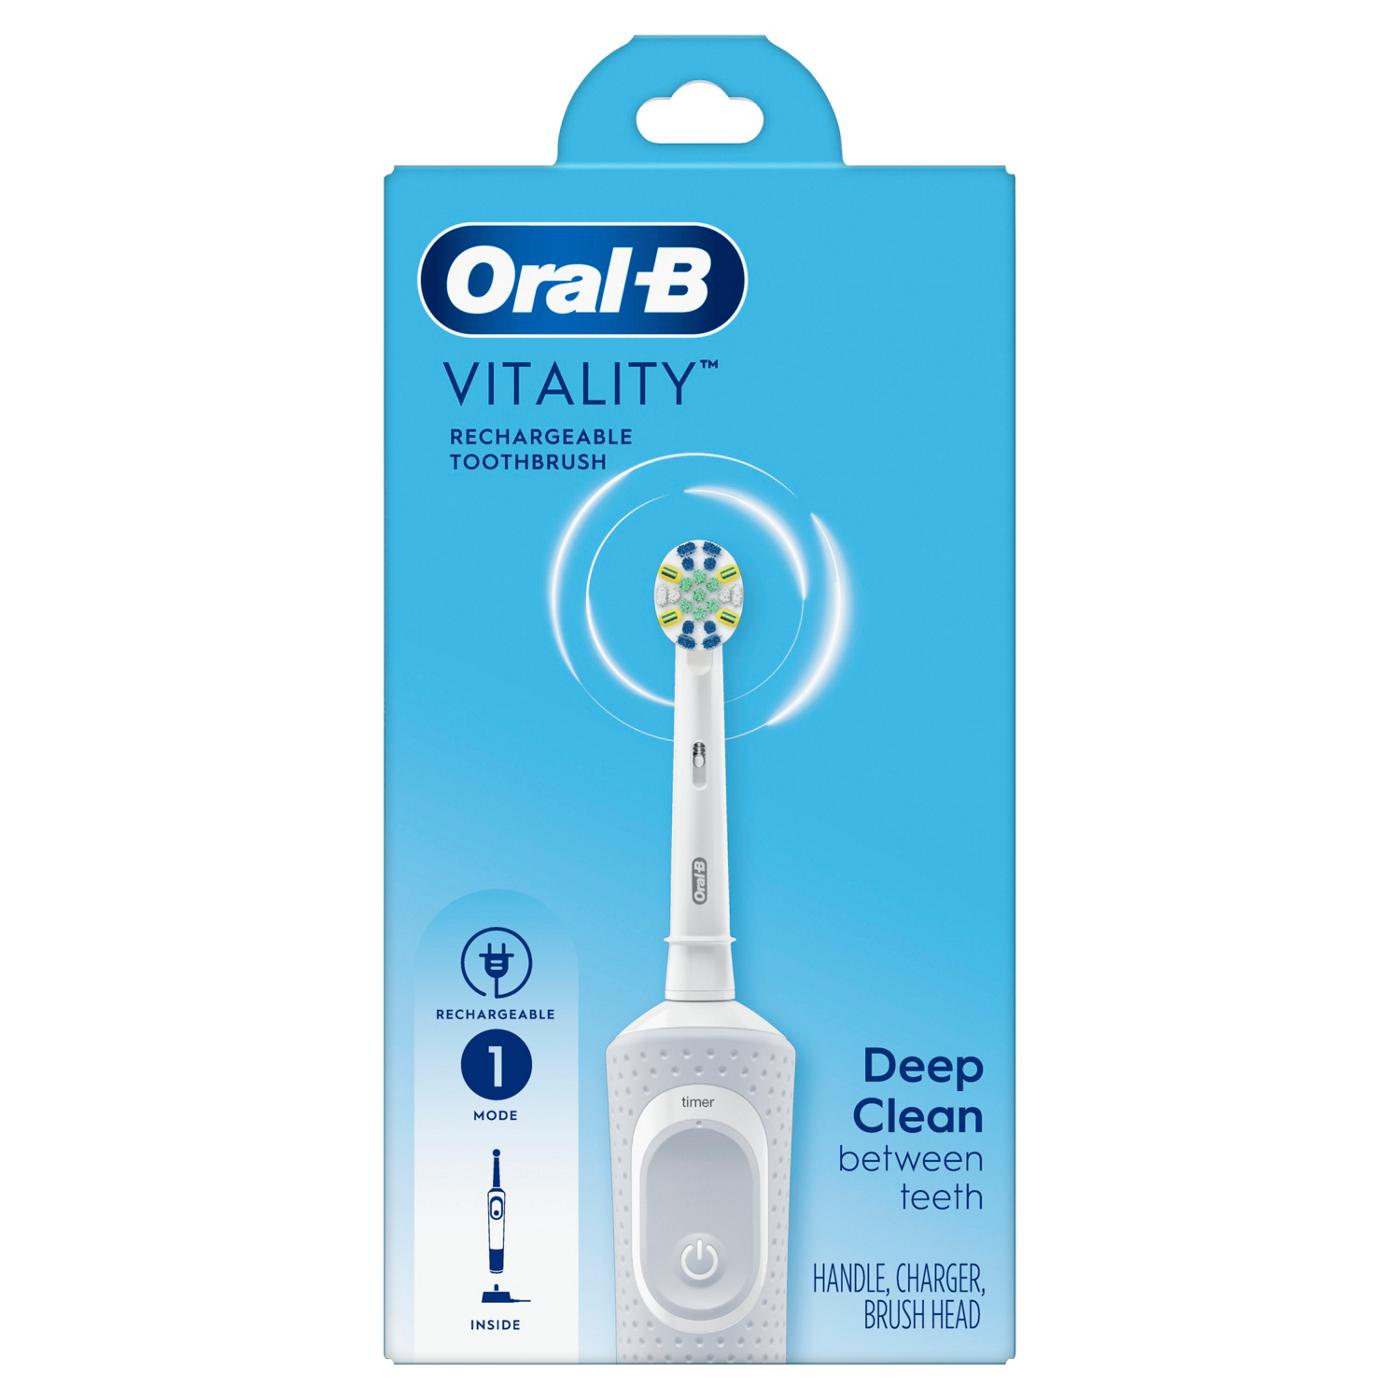 Oral-B Vitality Rechargeable Toothbrush; image 1 of 7